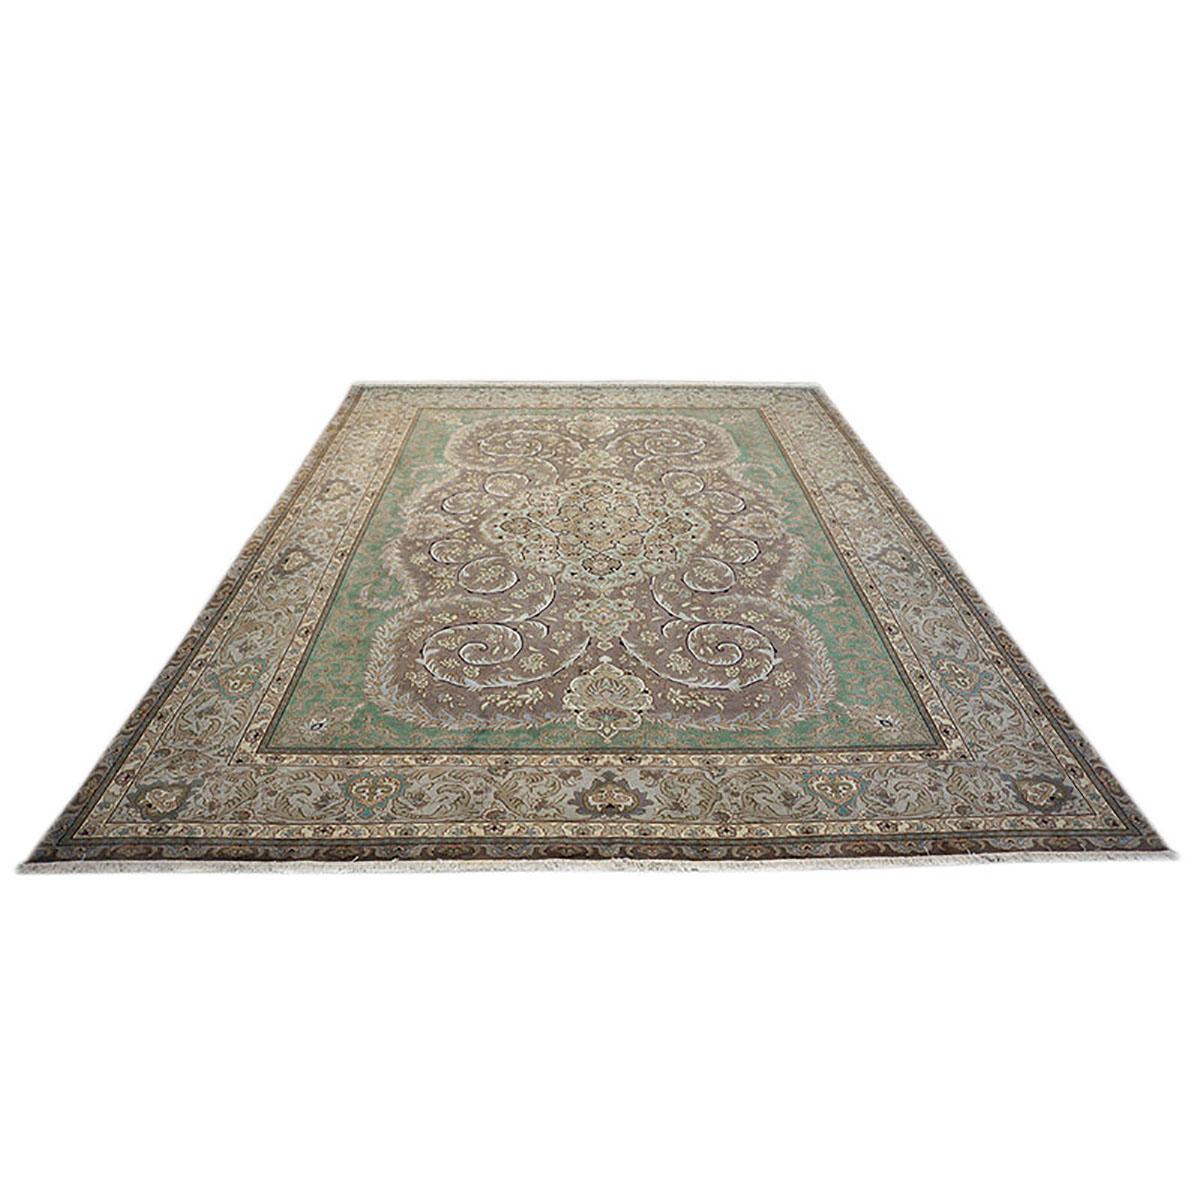 Ashly Fine rugs presents a 1930s Antique Persian Tabriz. Tabriz is a northern city in modern-day Iran and has forever been famous for the fineness and craftsmanship of its handmade rugs. This piece has a fern green-colored background with design,